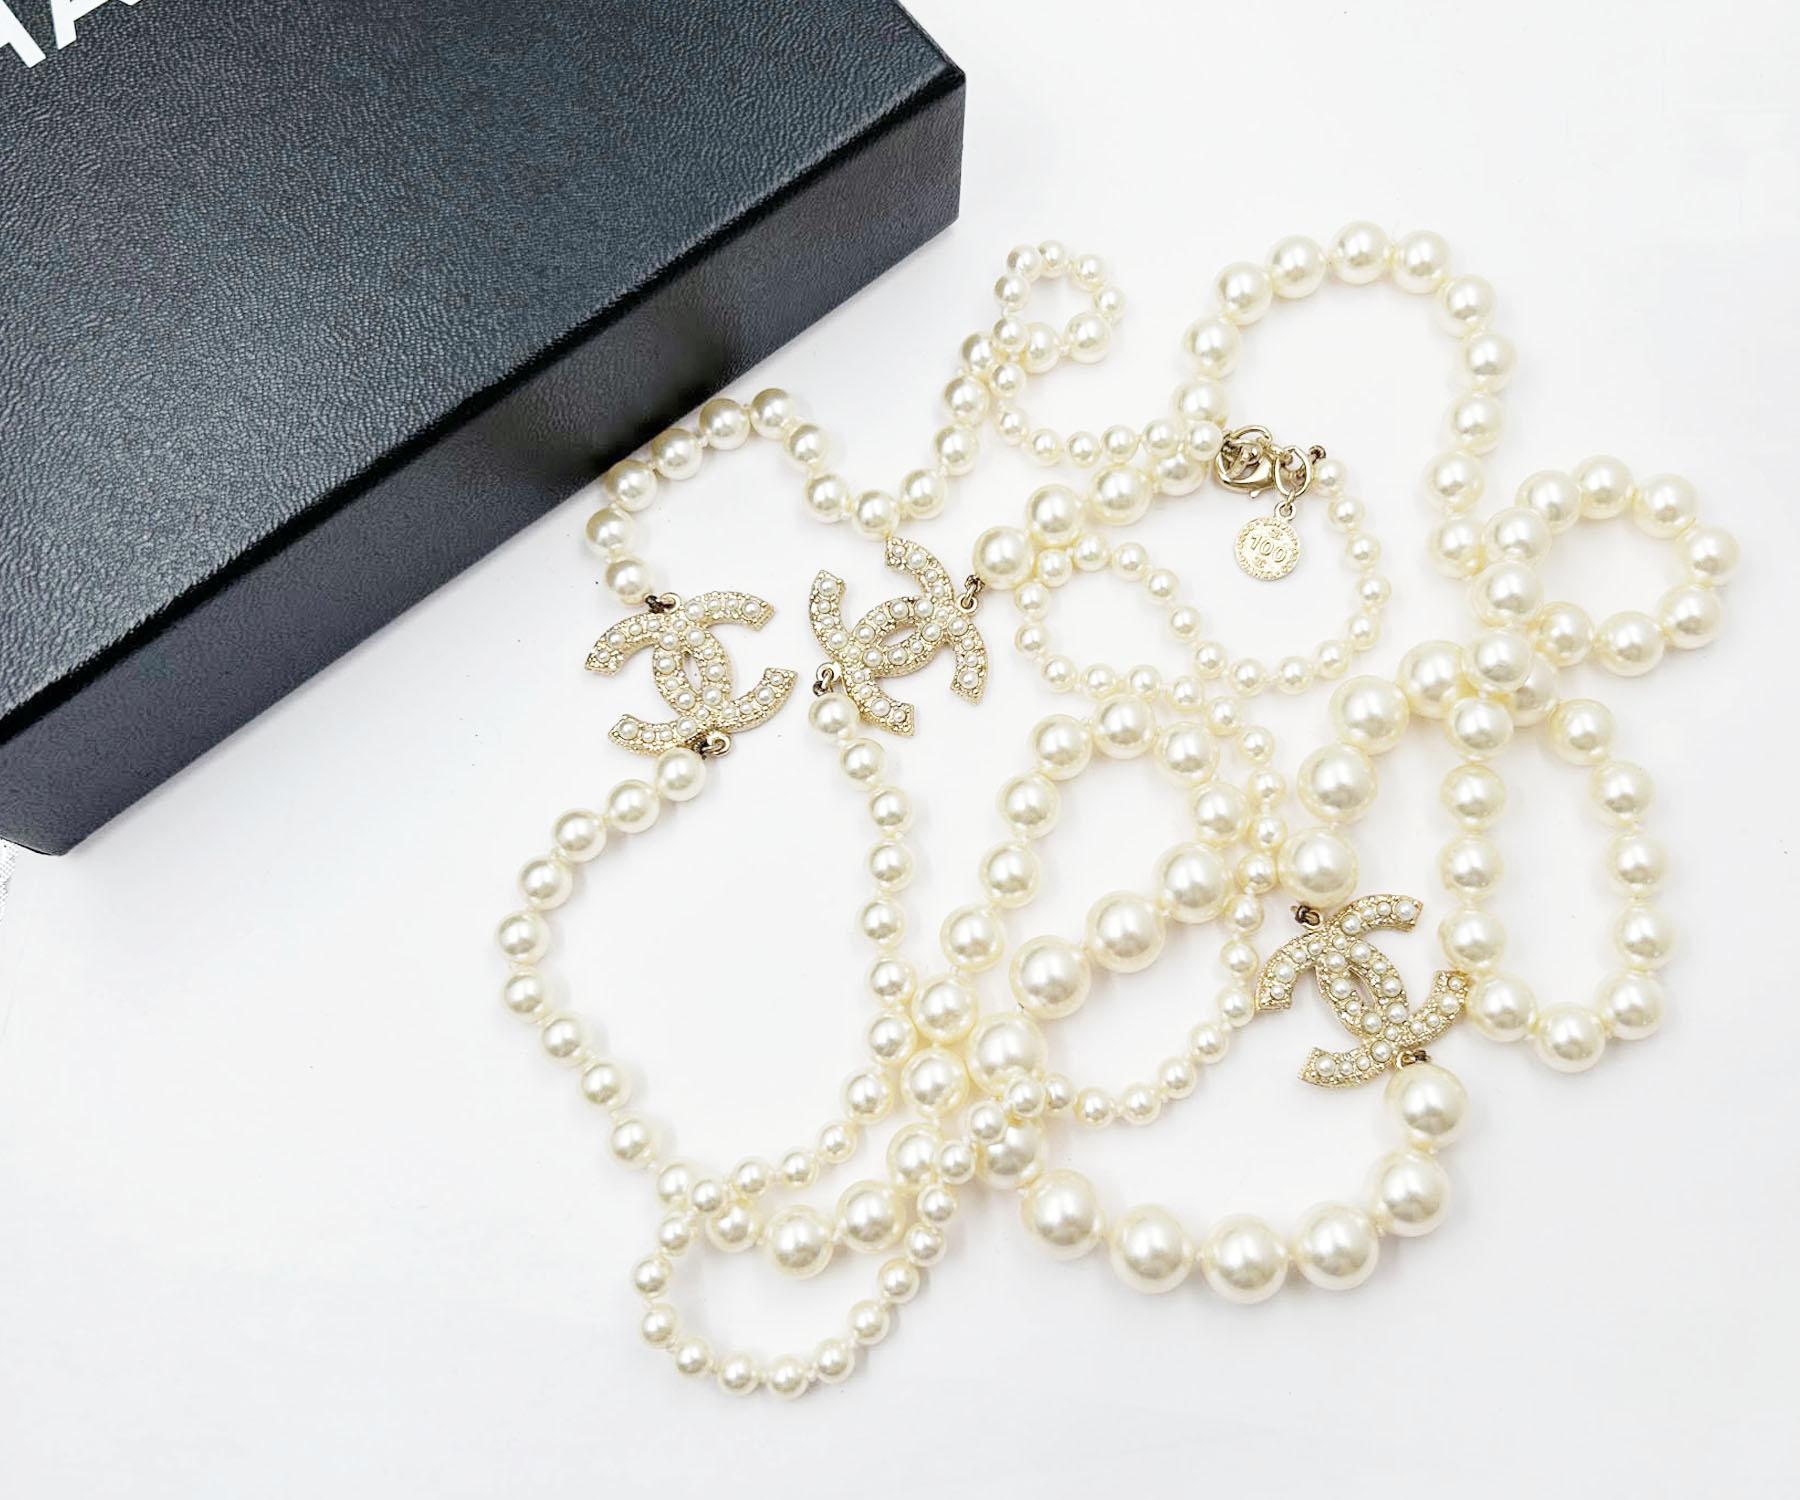 chanel 100 years necklace